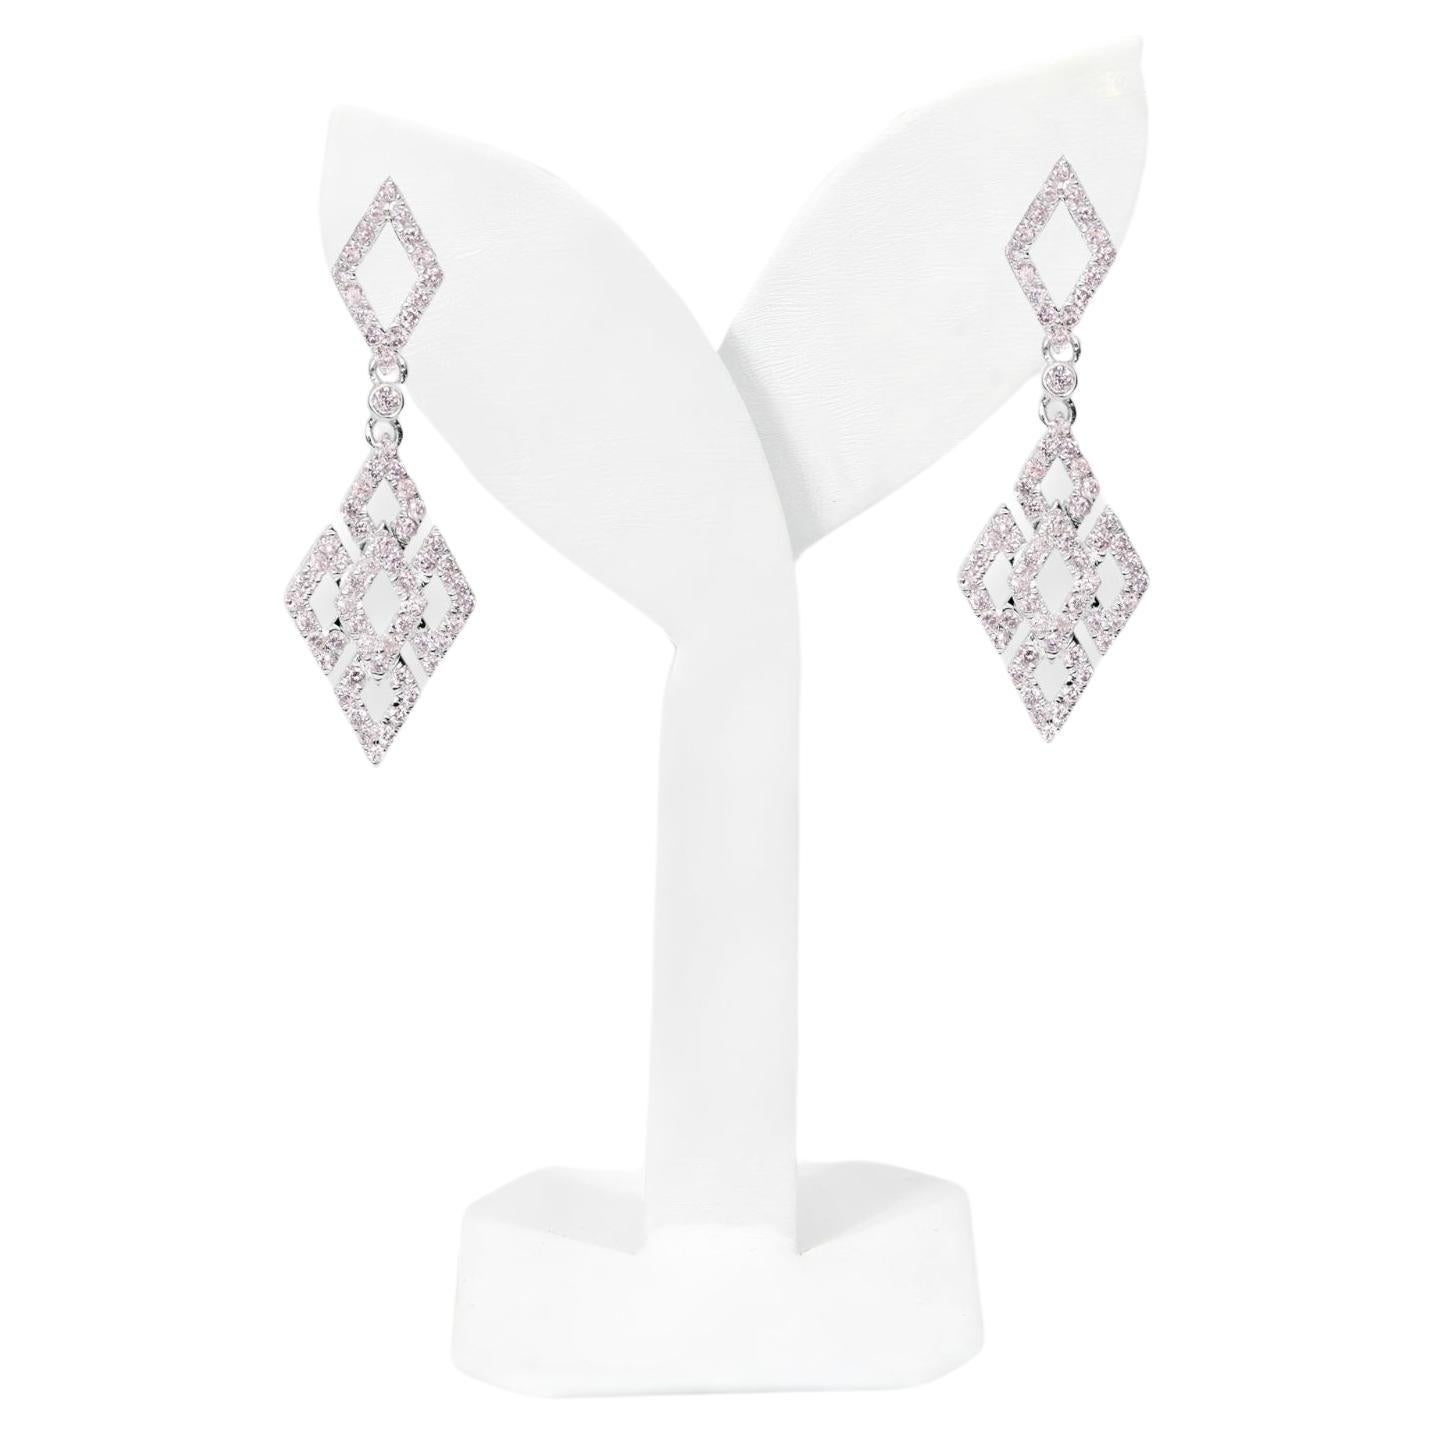 *IGI 14K 0.96 ct Natural Pink Diamonds Art Deco Design Stud Earrings*

This band features a stunning art deco design crafted from 14K white gold. It is set with natural pink diamonds weighing 0.96 carats.

These earrings feature colorful natural